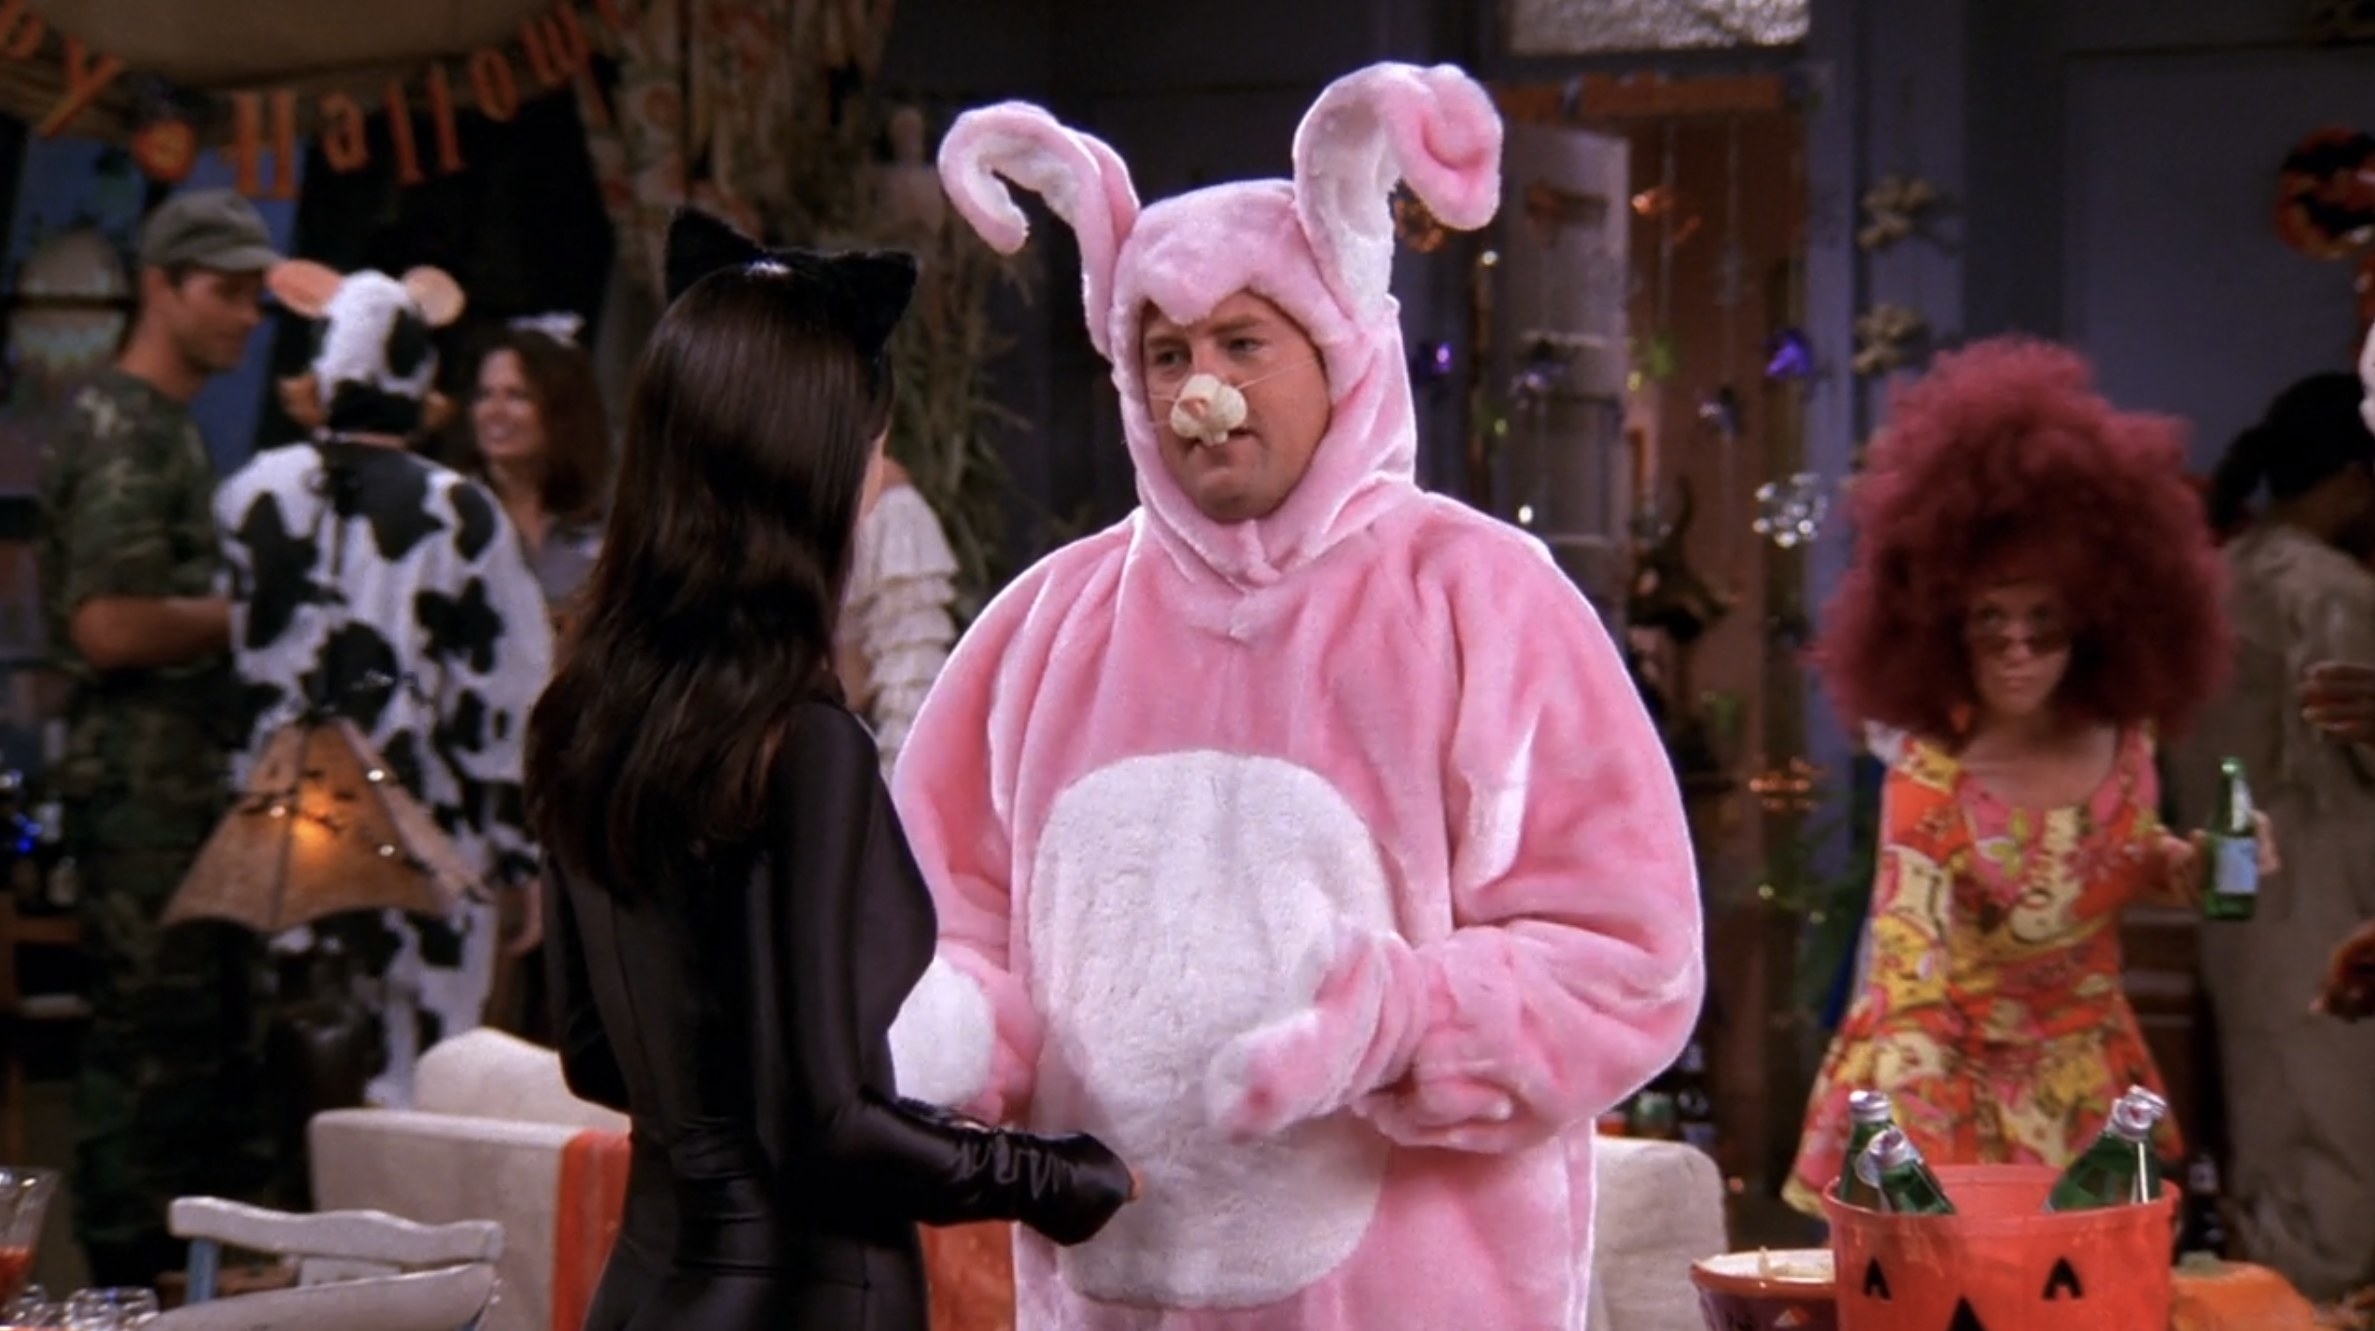 chandler dressed as a bunny in friends